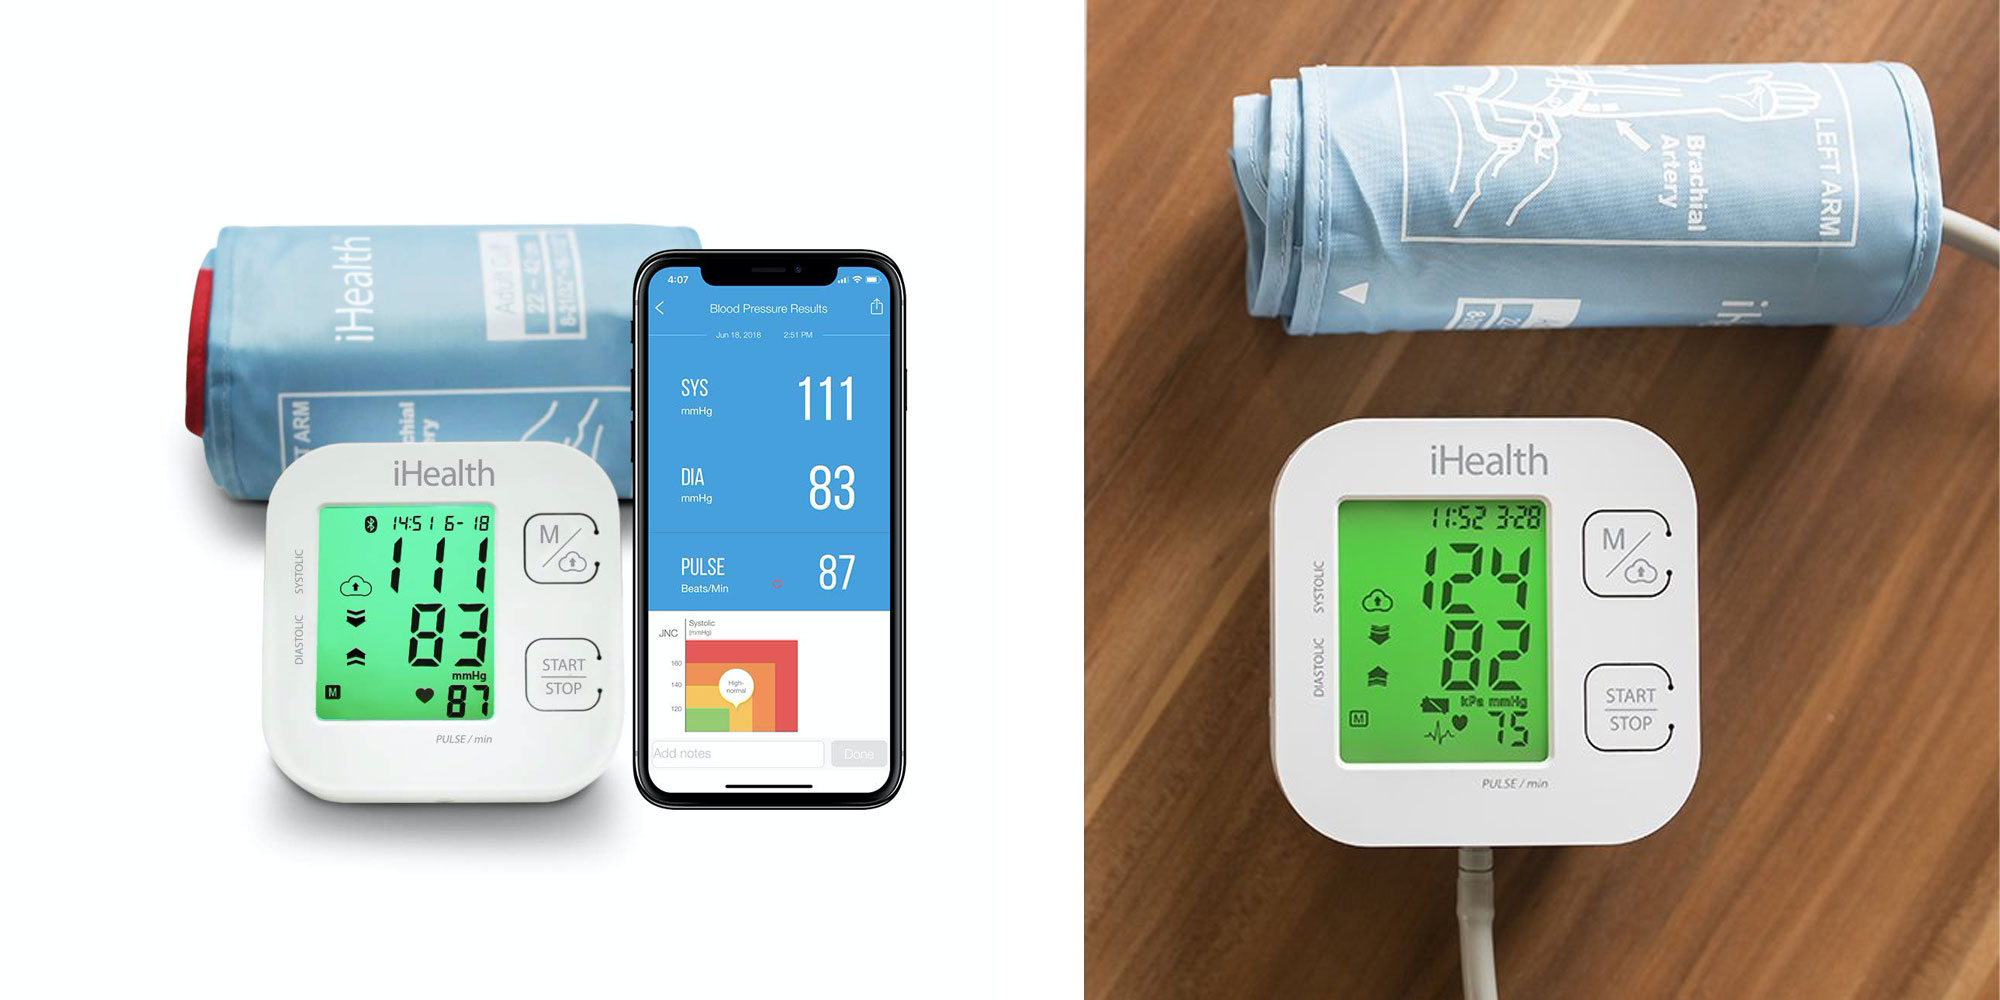 https://9to5toys.com/wp-content/uploads/sites/5/2019/10/iHealth-HealthKit-Blood-Pressure-Monitor.jpg